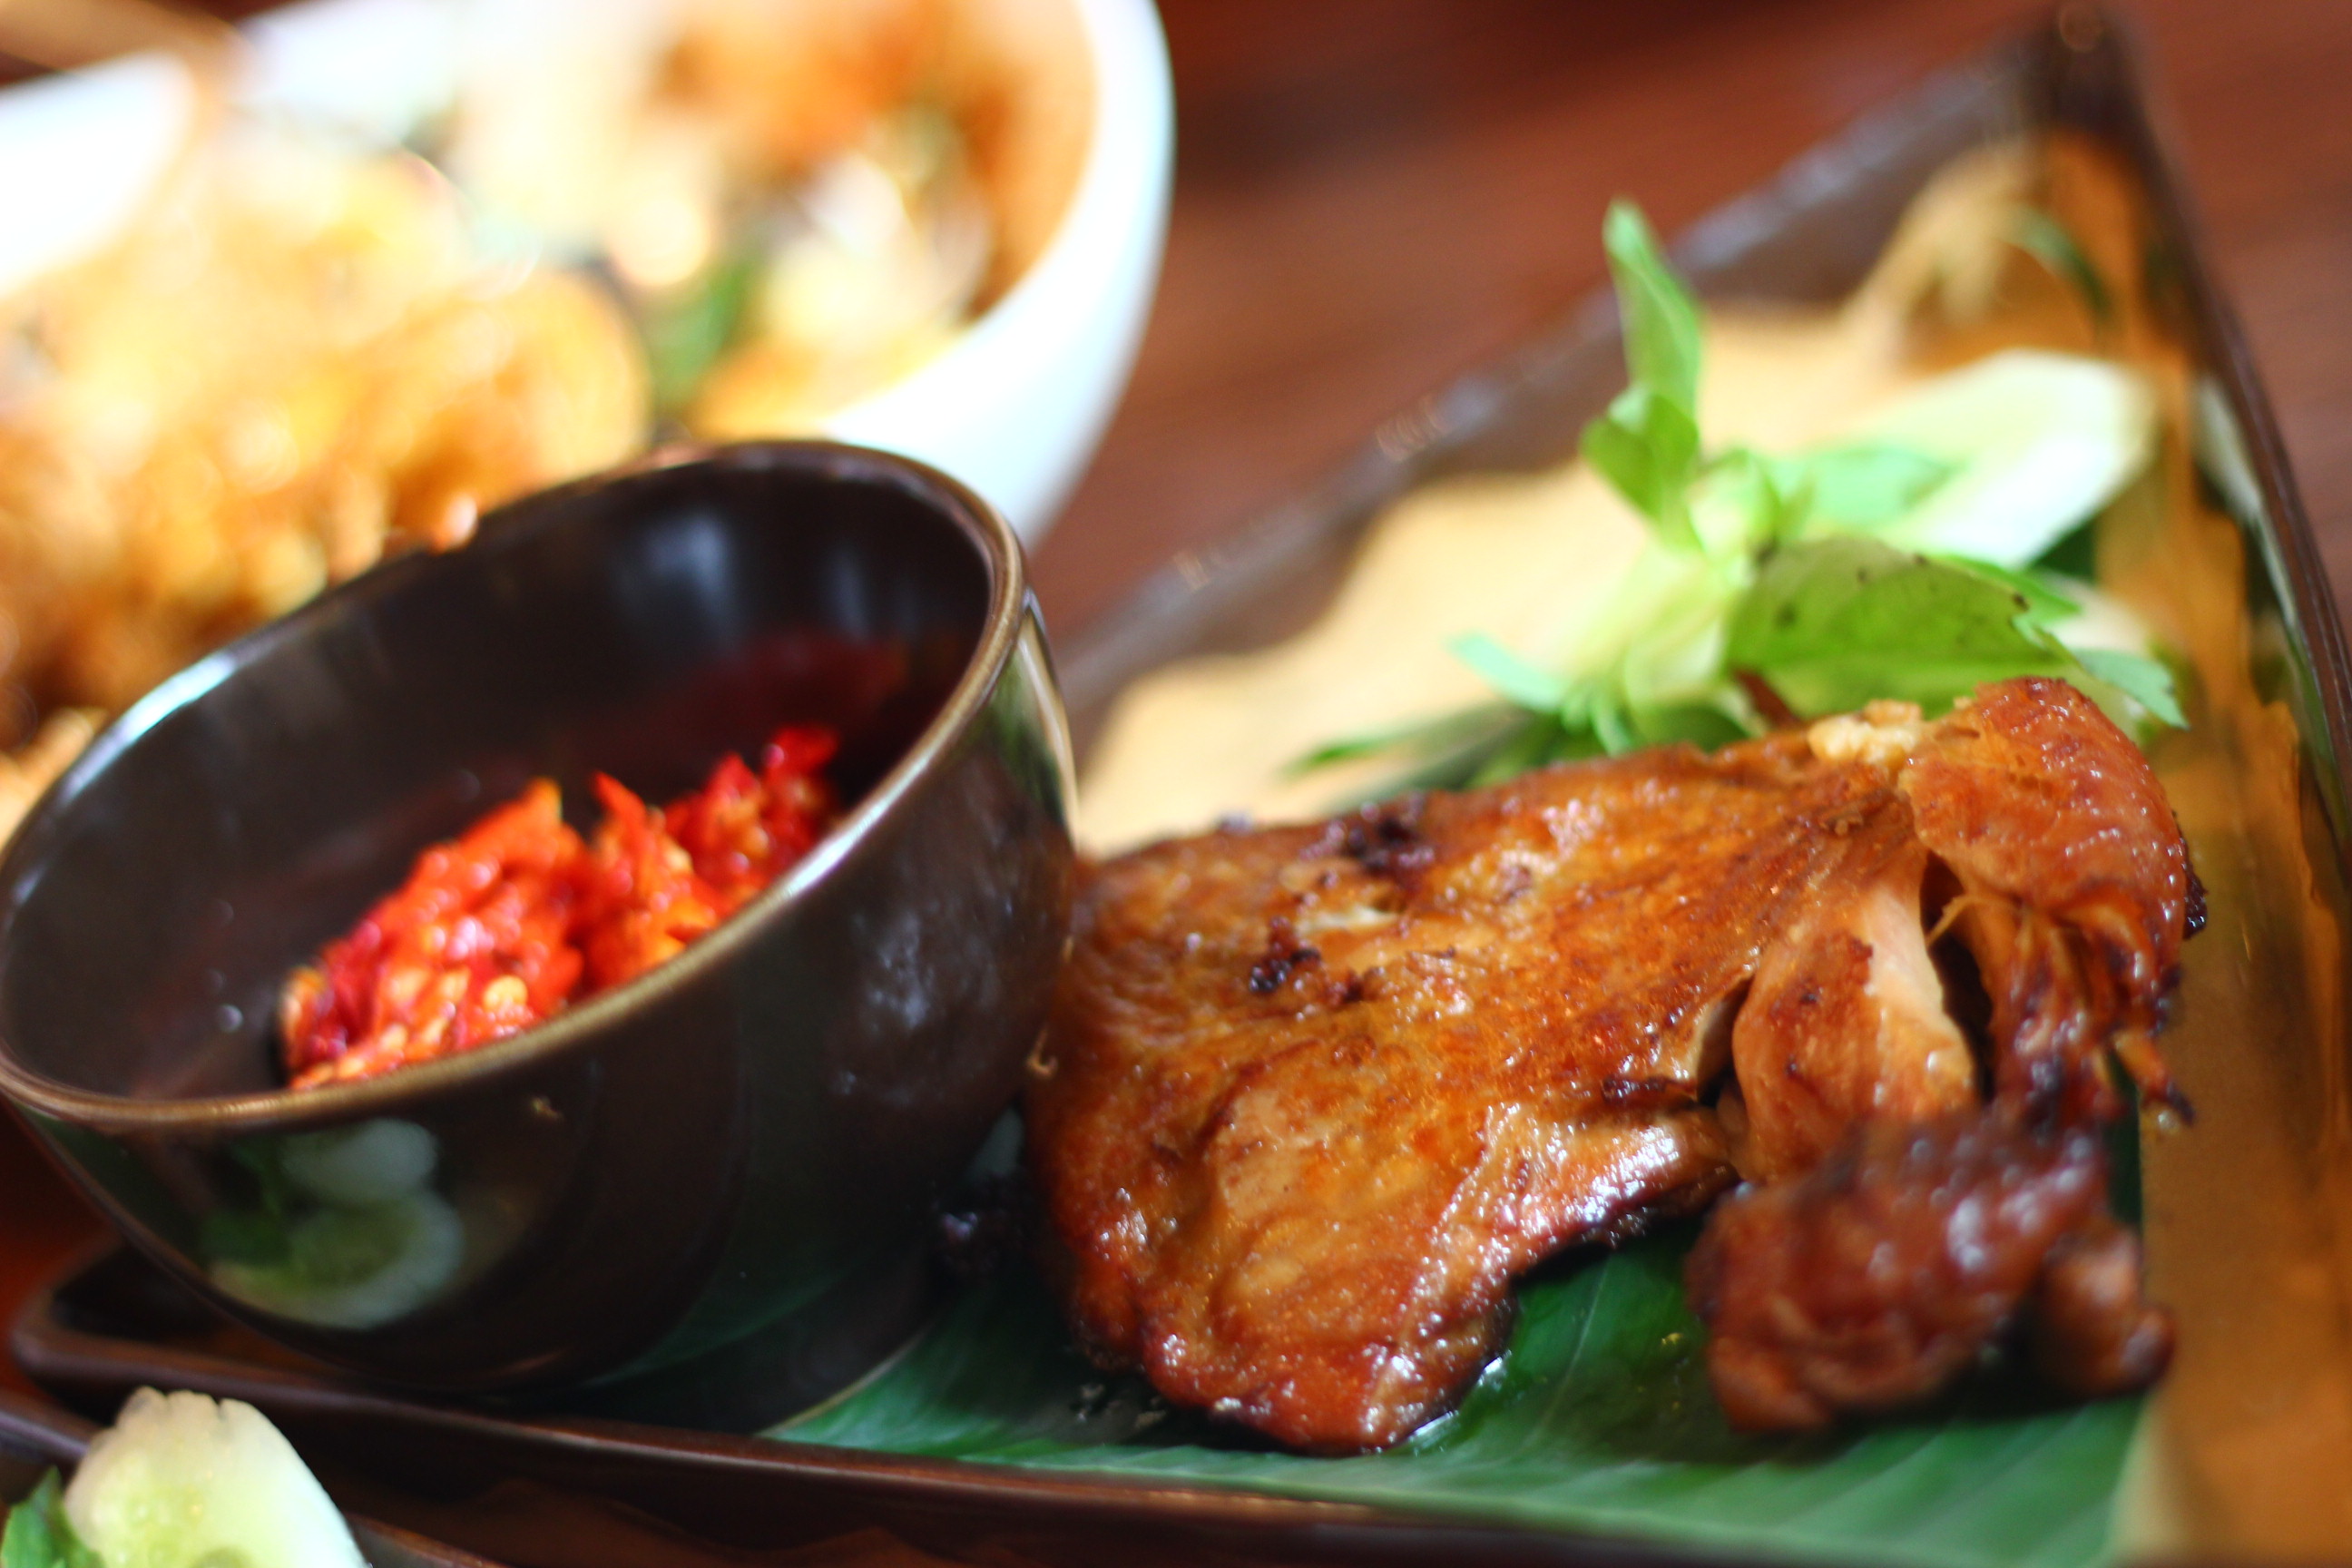 Food Review: 3 Best Restaurants to check out in Jakarta – The Ranting Panda